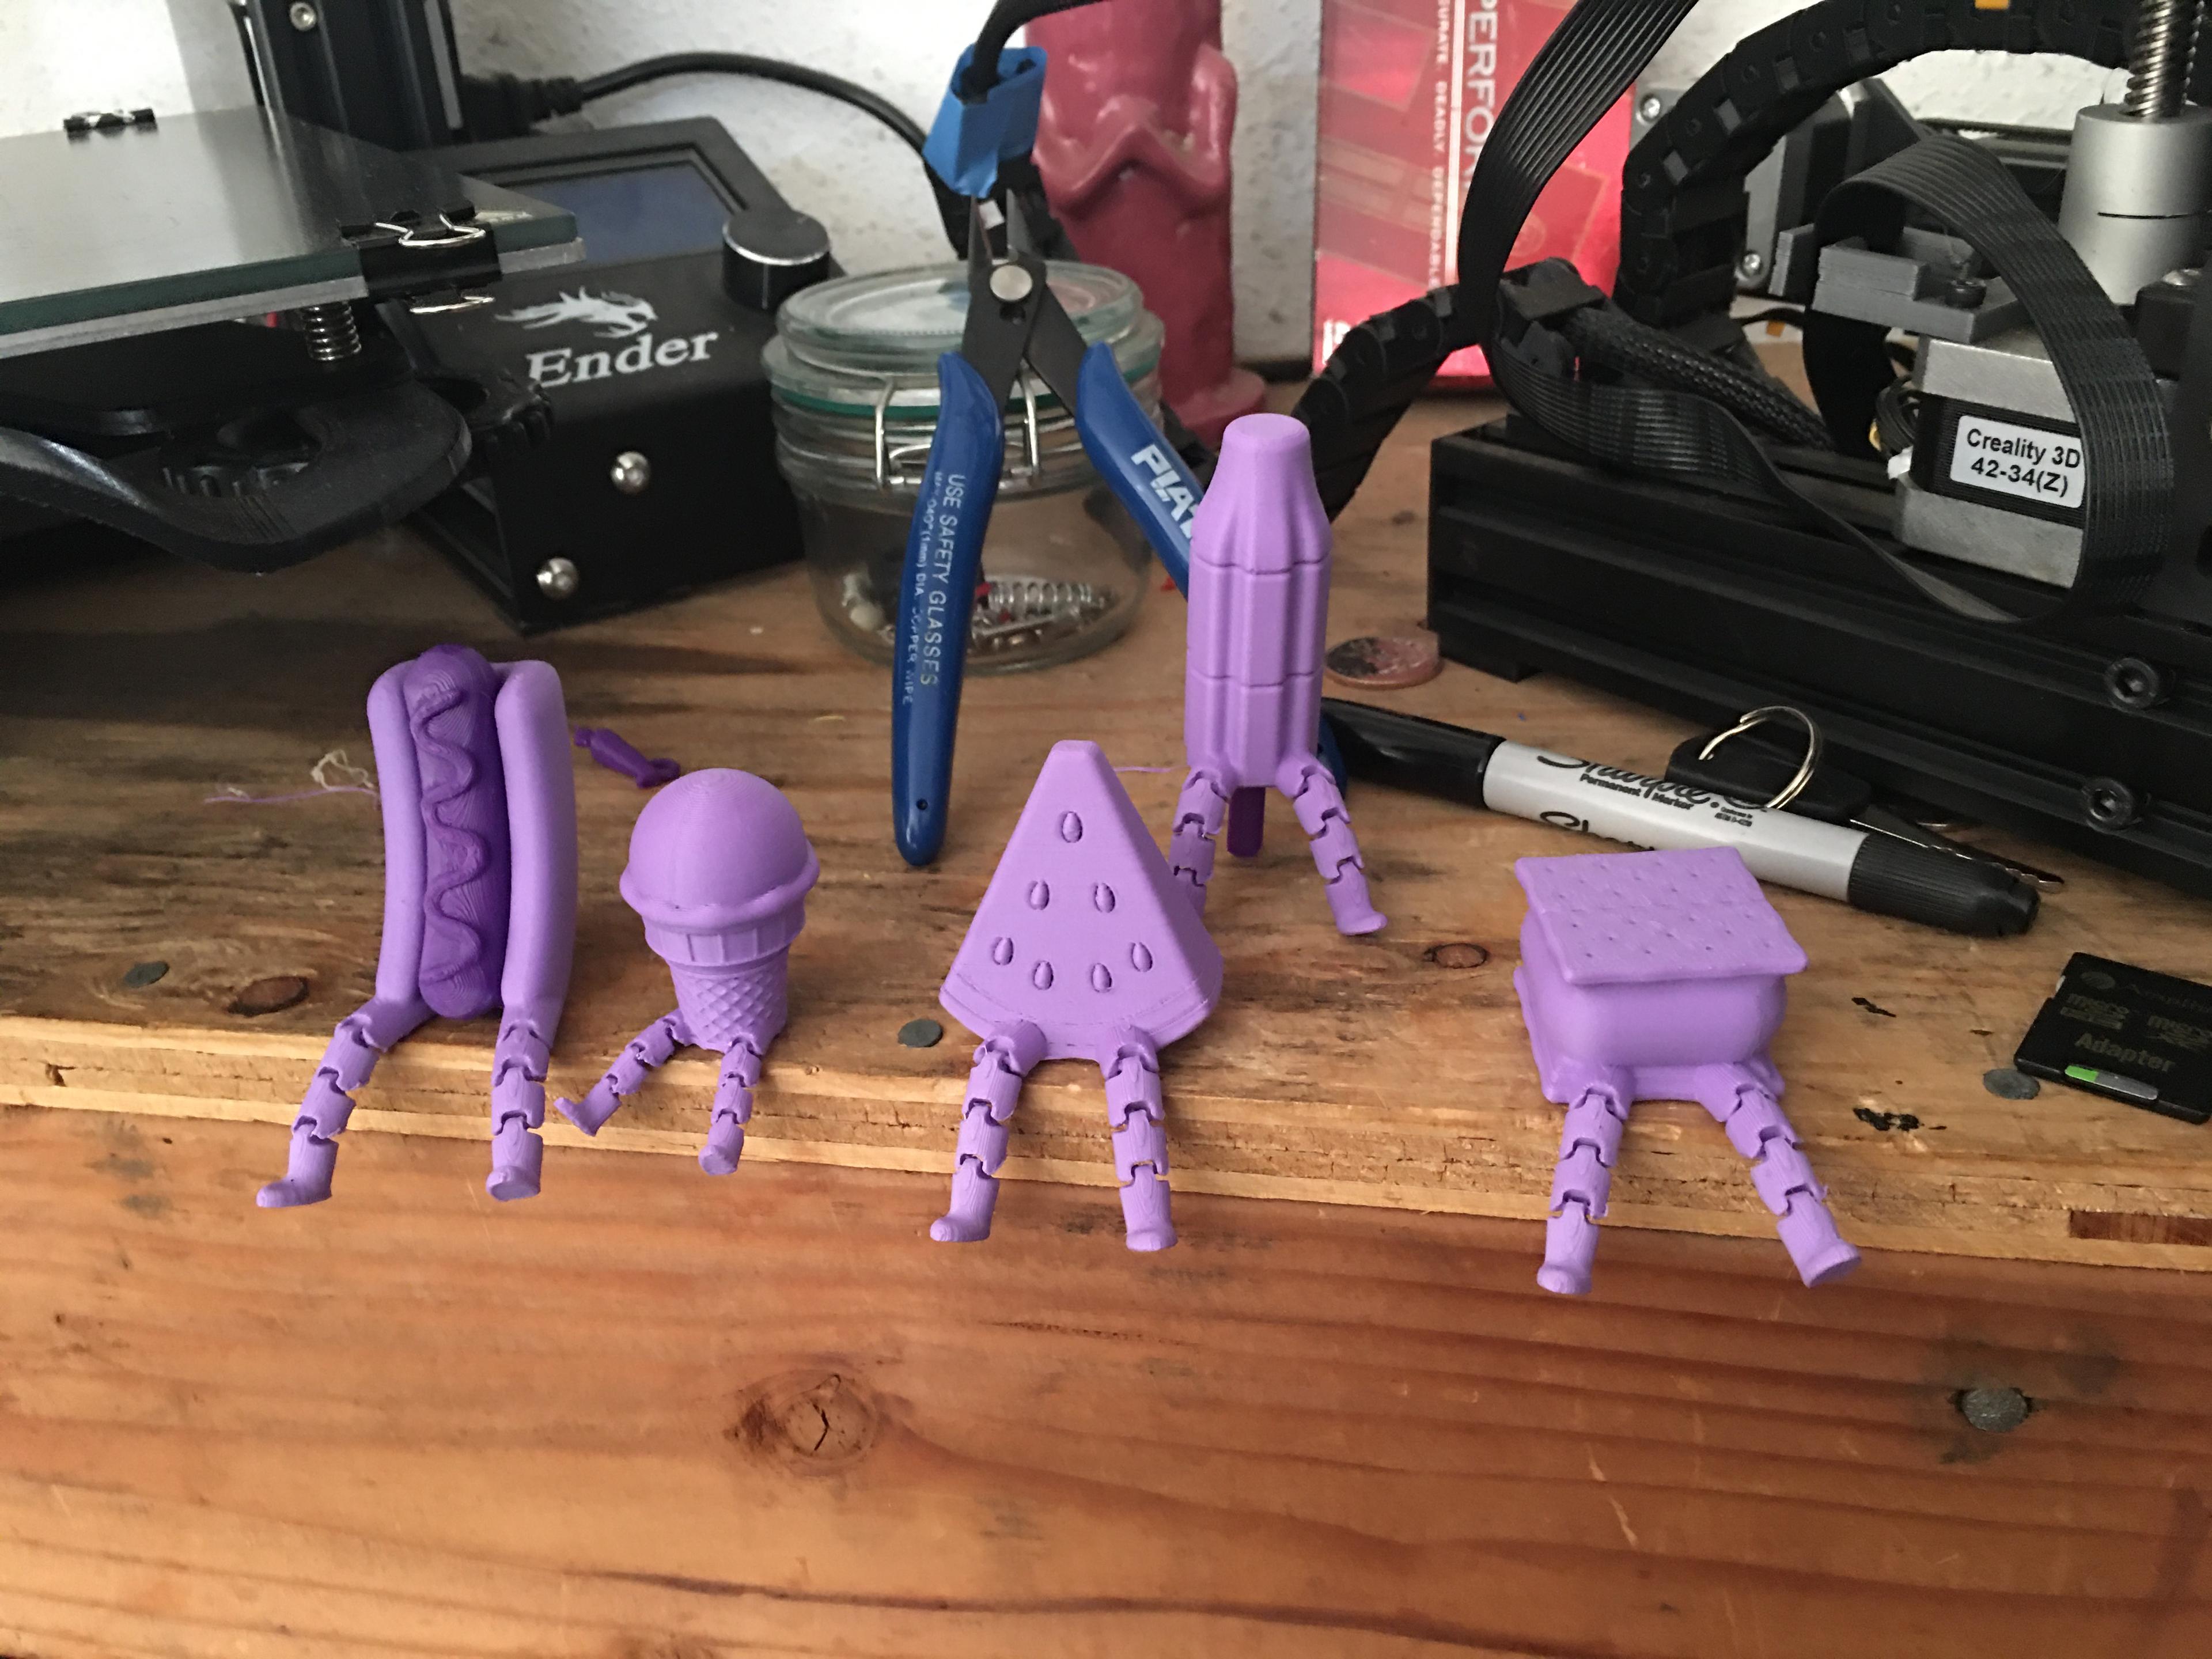 Hot Dog Man - Great designs!  I printed at 50% scale and 0.16 mm height to run out my lavender spool.  The leg joints were a close thing at that scale but turned out all right. - 3d model